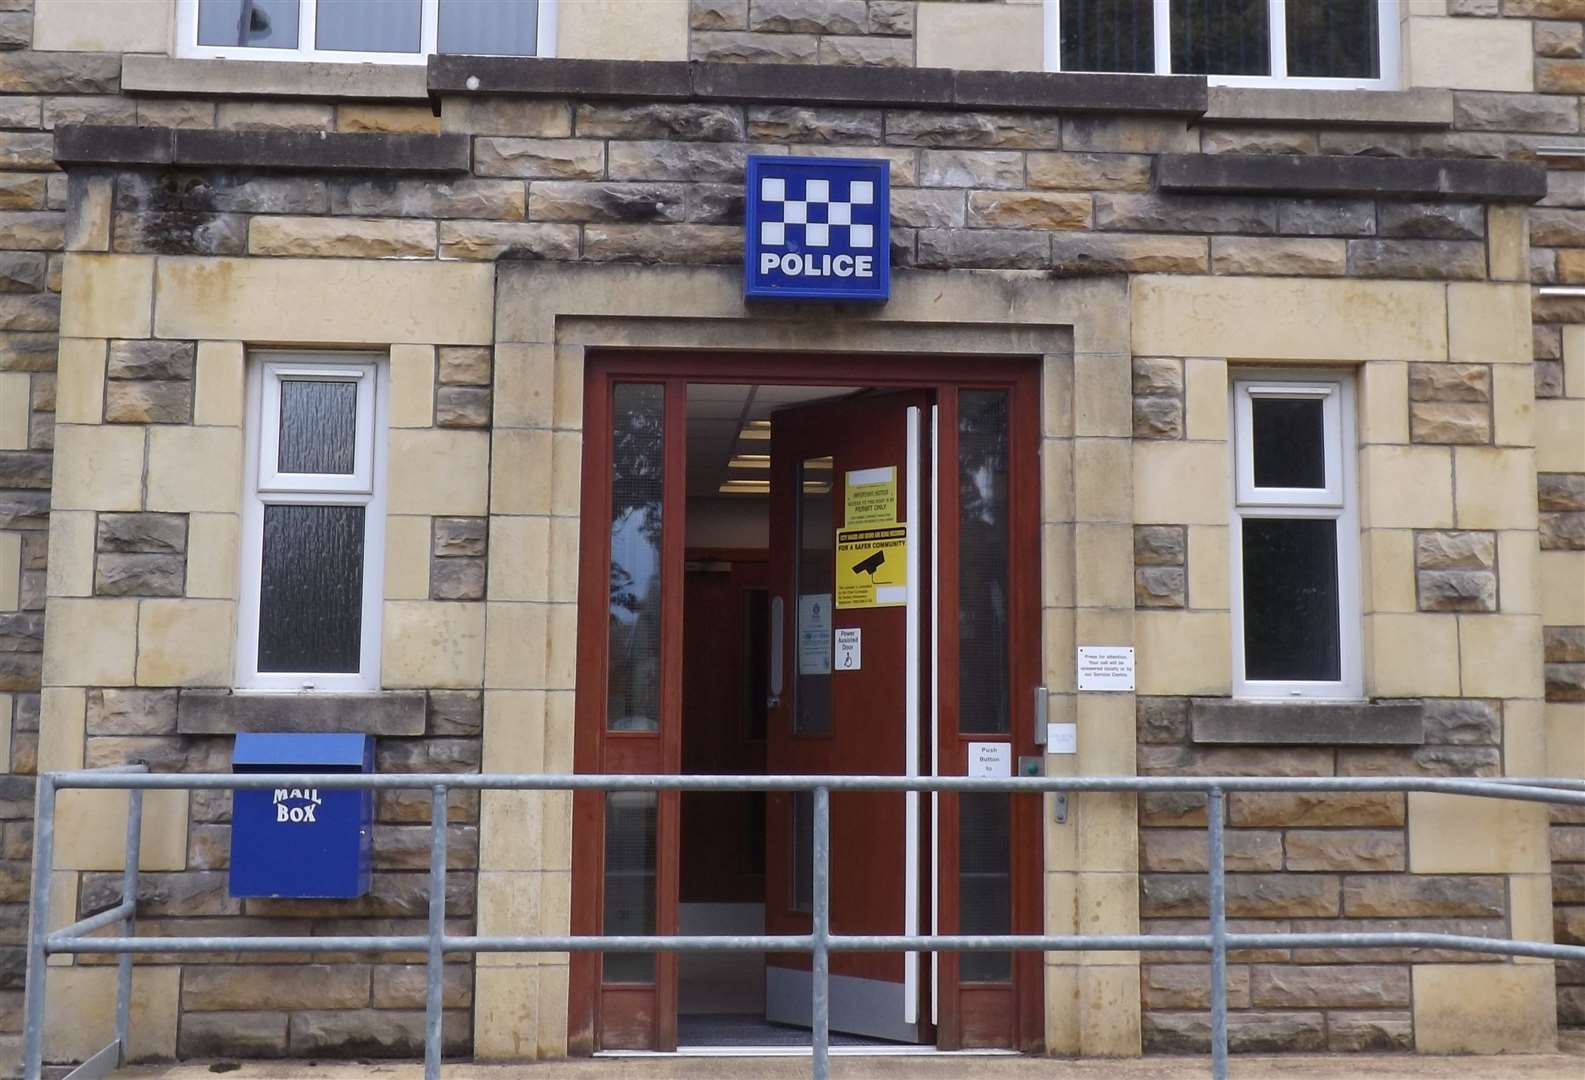 Forres Police Station public counter is open Monday to Friday.